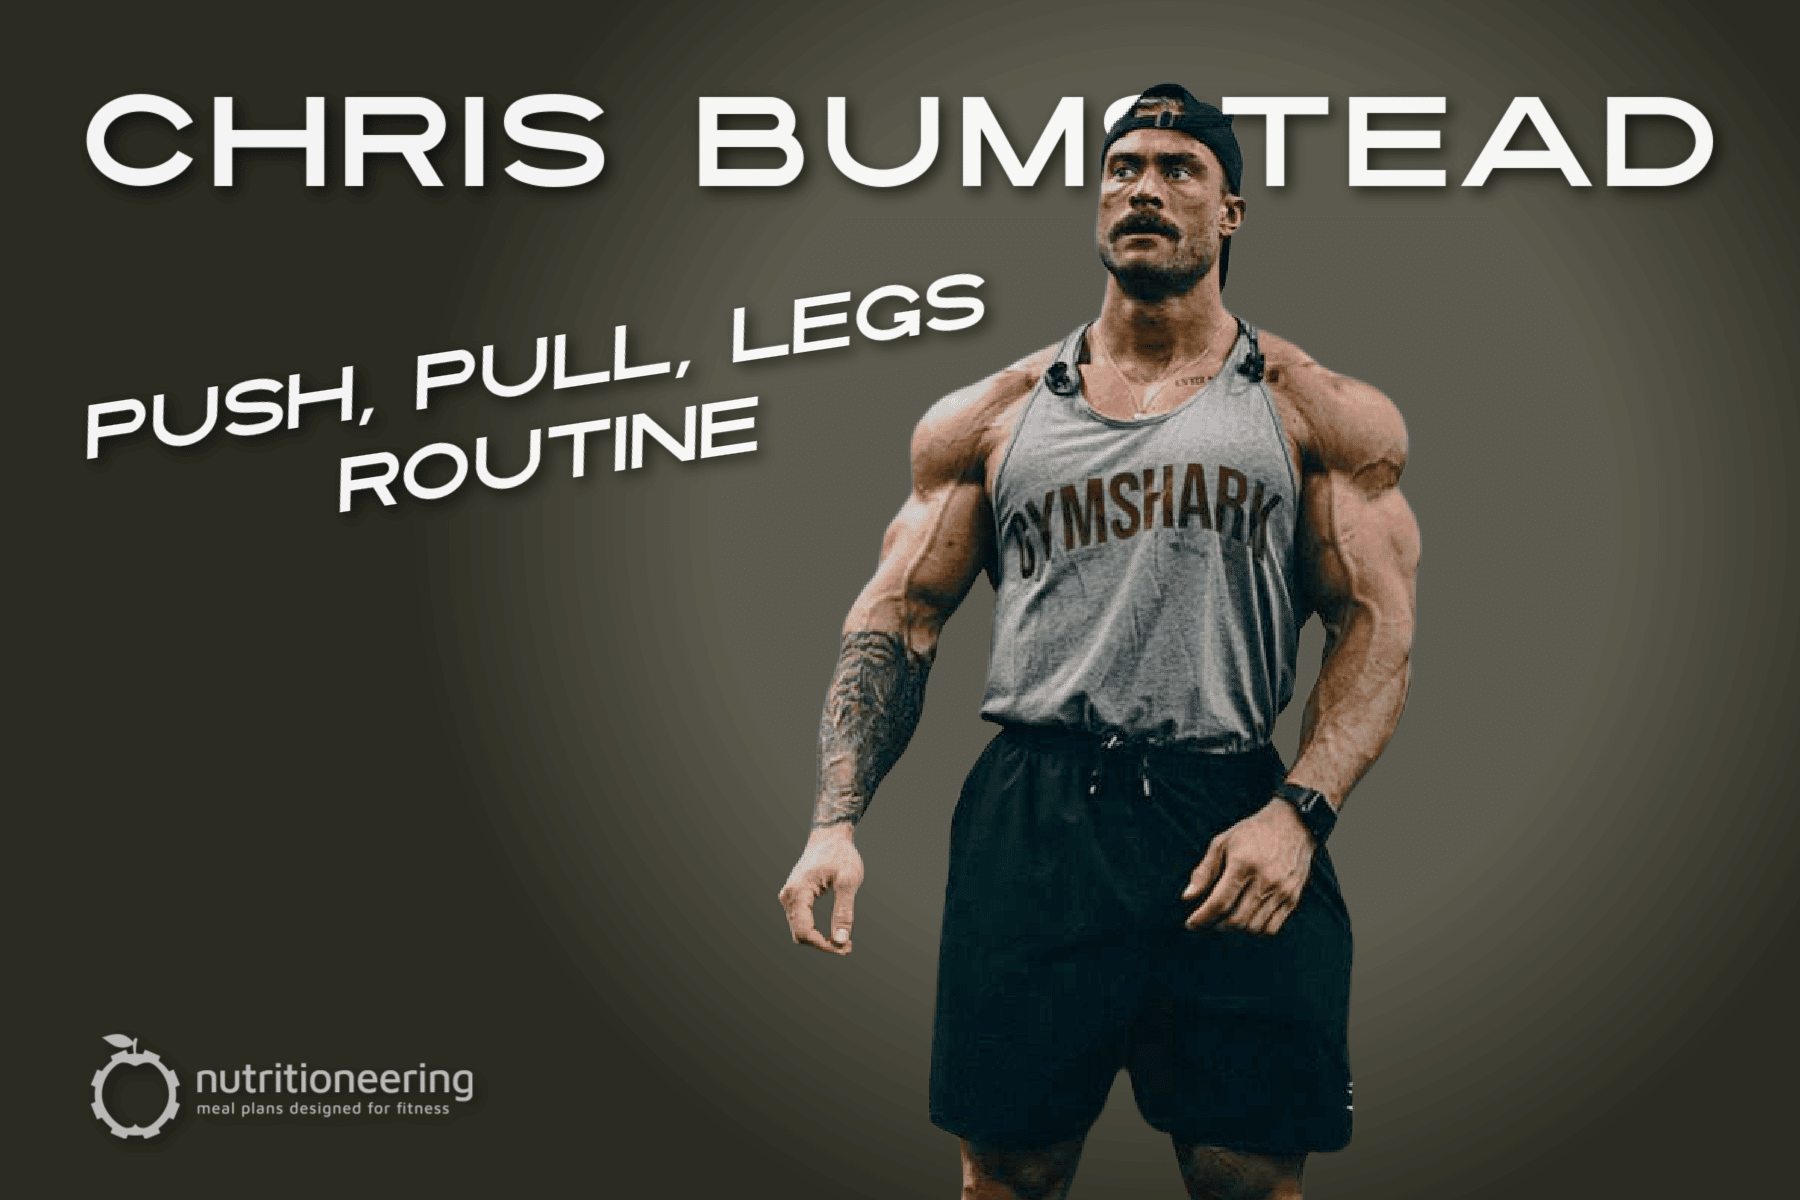 Chris Bumstead Push Pull Legs Routine Exact 6 Day Split 2023